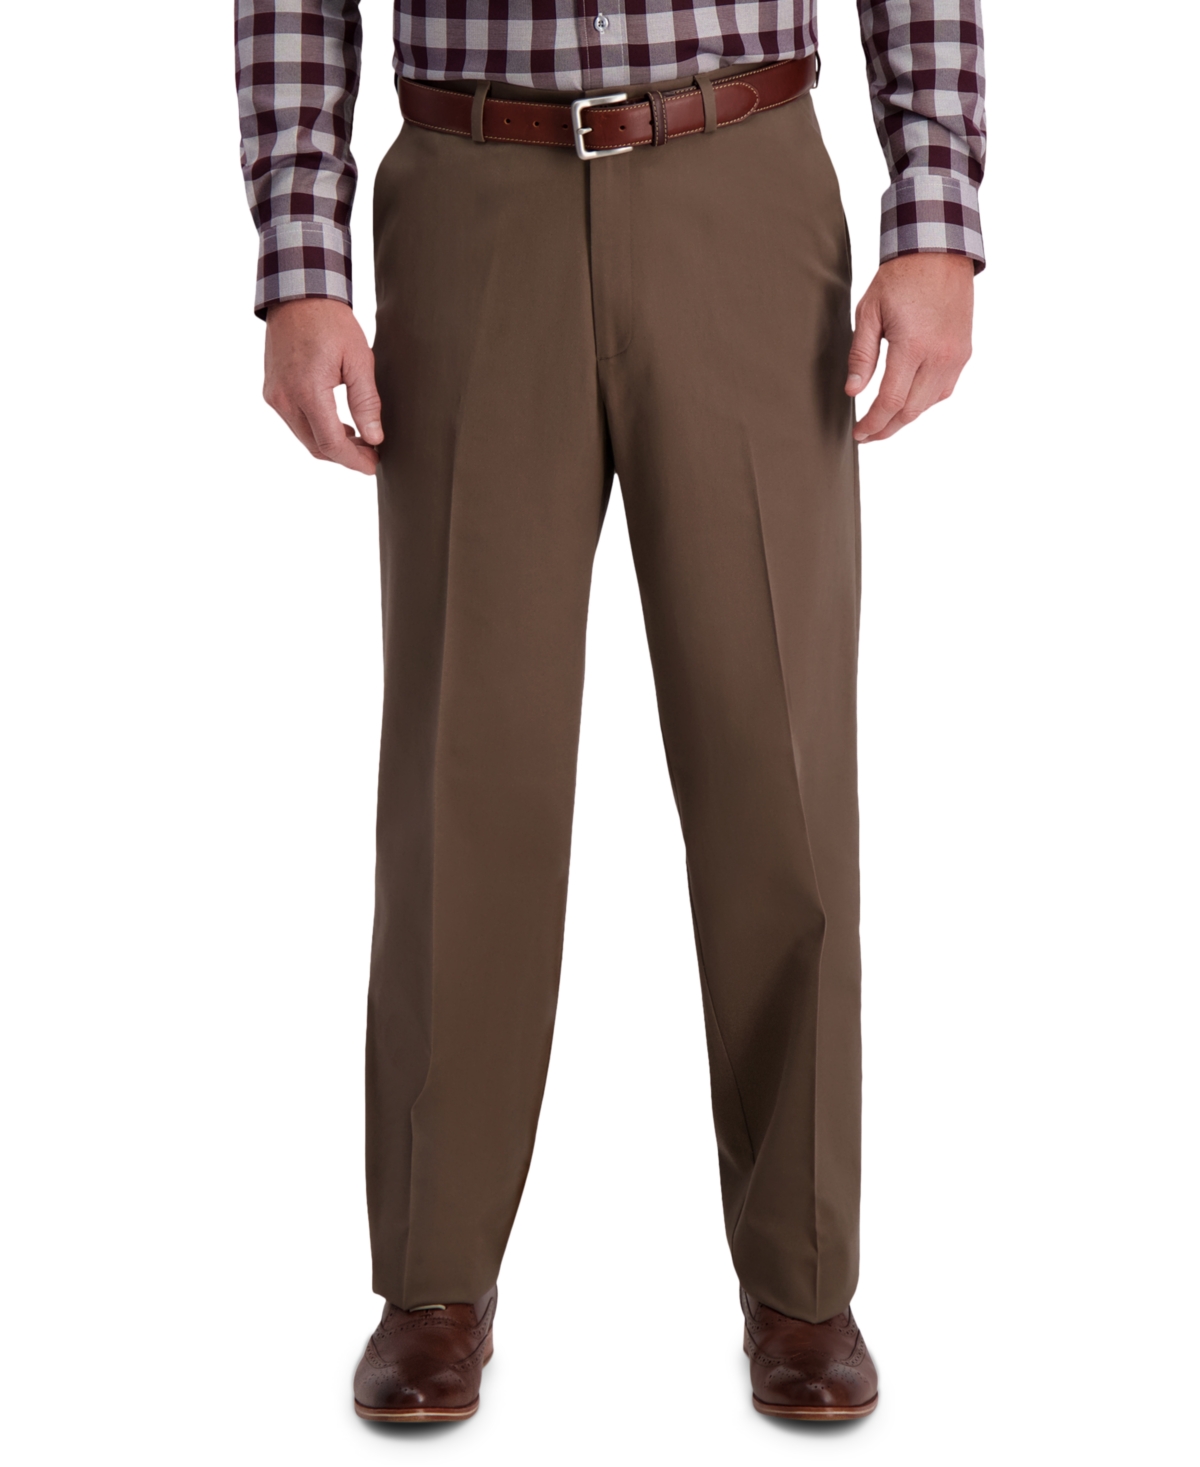 Men's W2W Pro Relaxed-Fit Flat Front Casual Pants - Bark